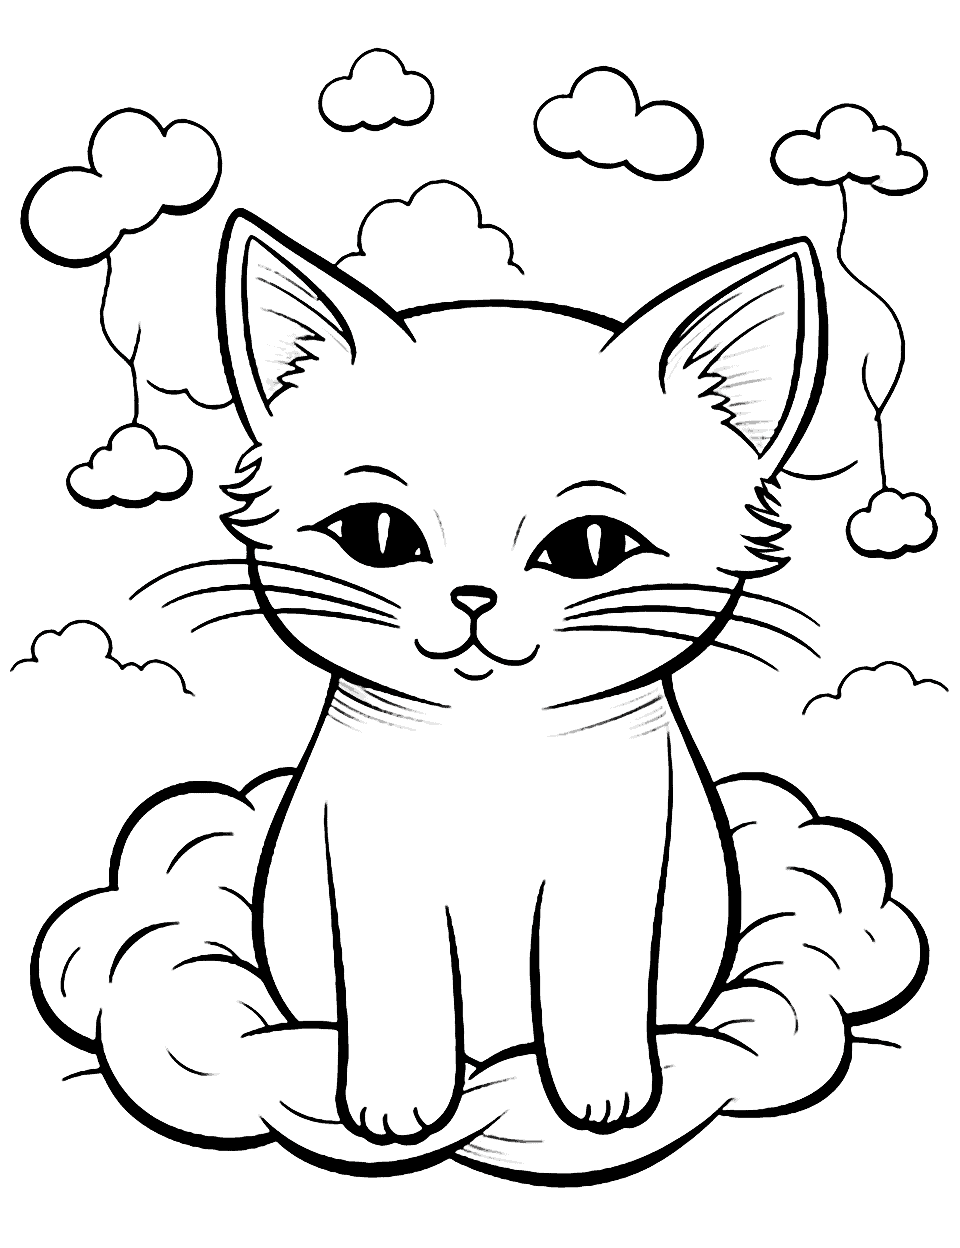 Cat Dreaming of Clouds Coloring Page - A snoozing cat dreaming with dreamy clouds around.